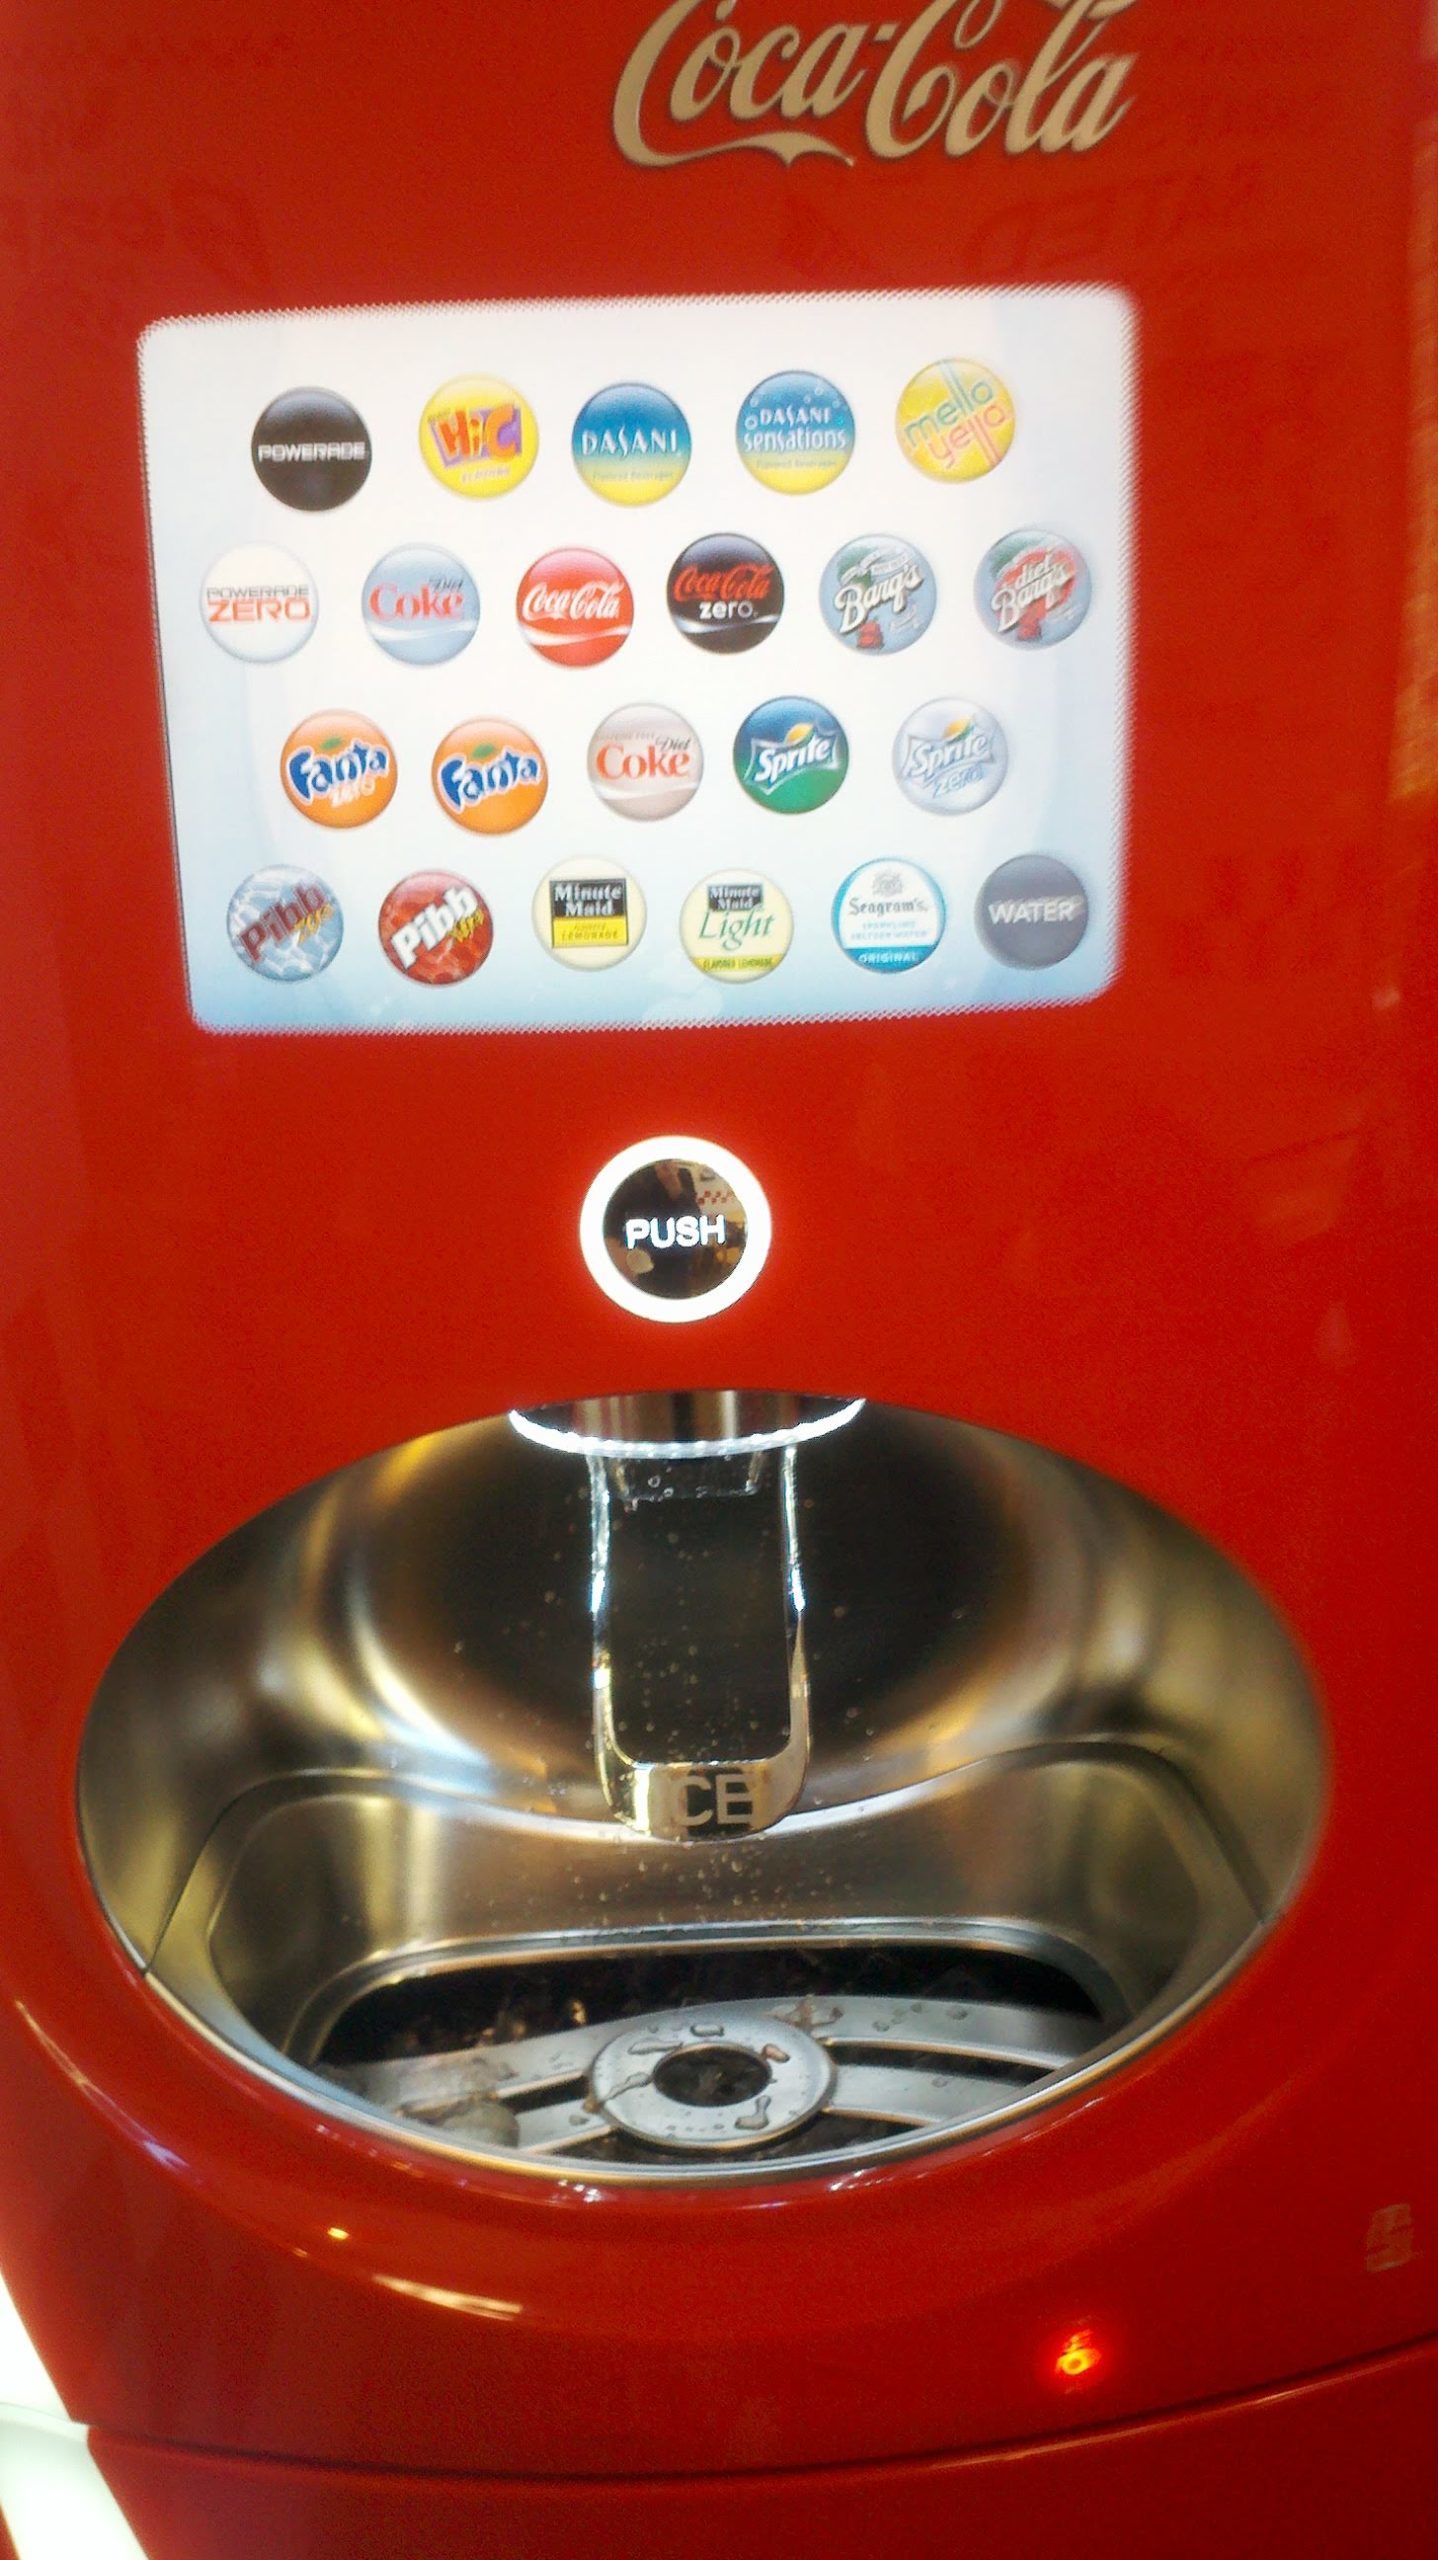 Image of the "freestyle" Coca-Cola drink machines. 